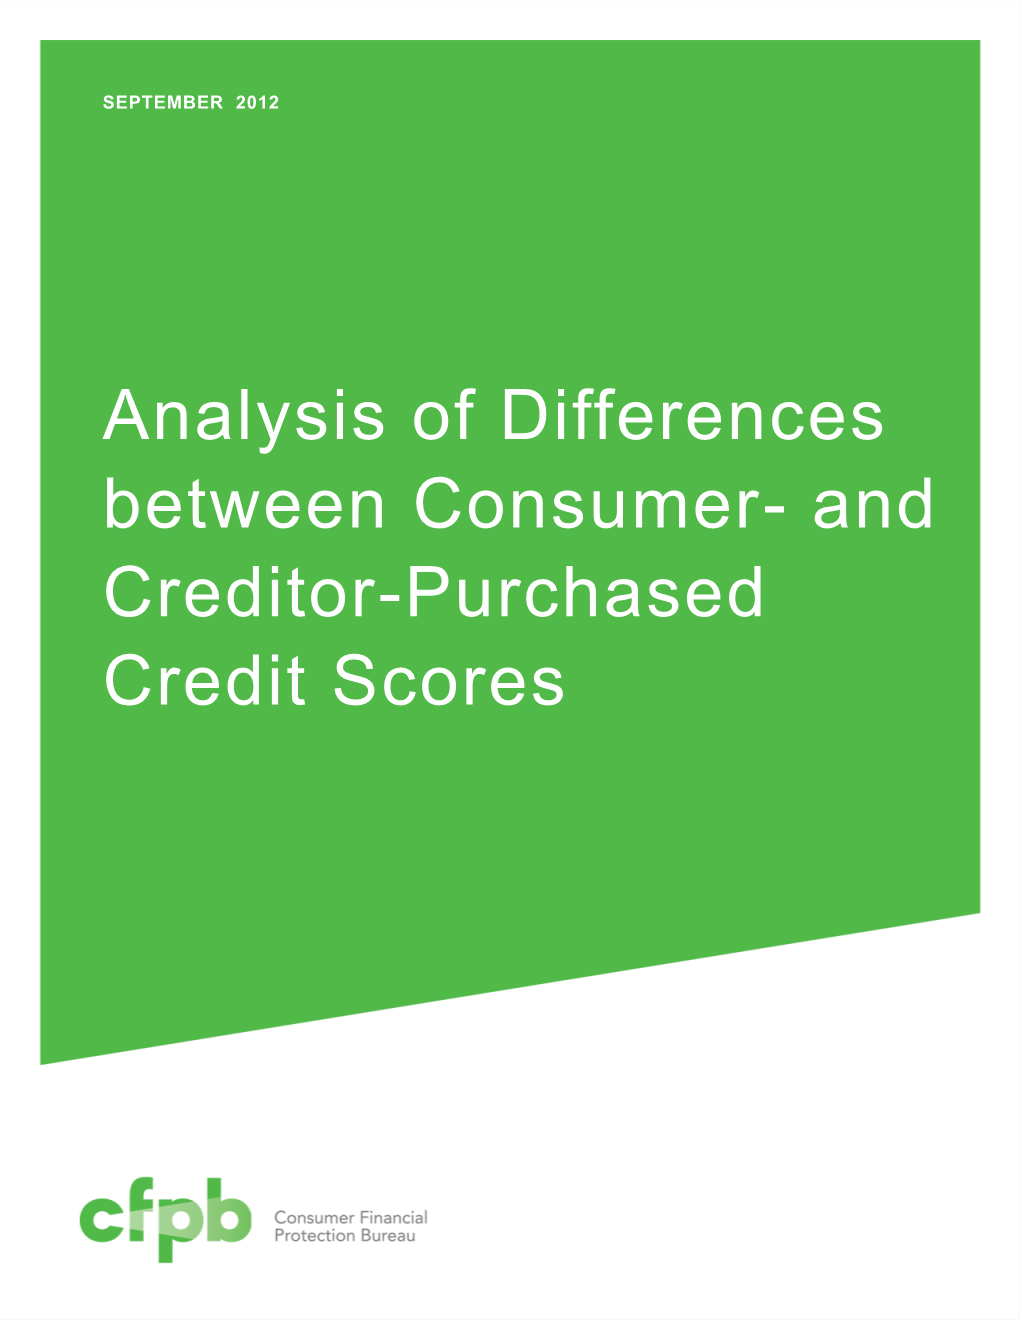 Analysis of Differences Between Consumer- and Creditor-Purchased Credit Scores